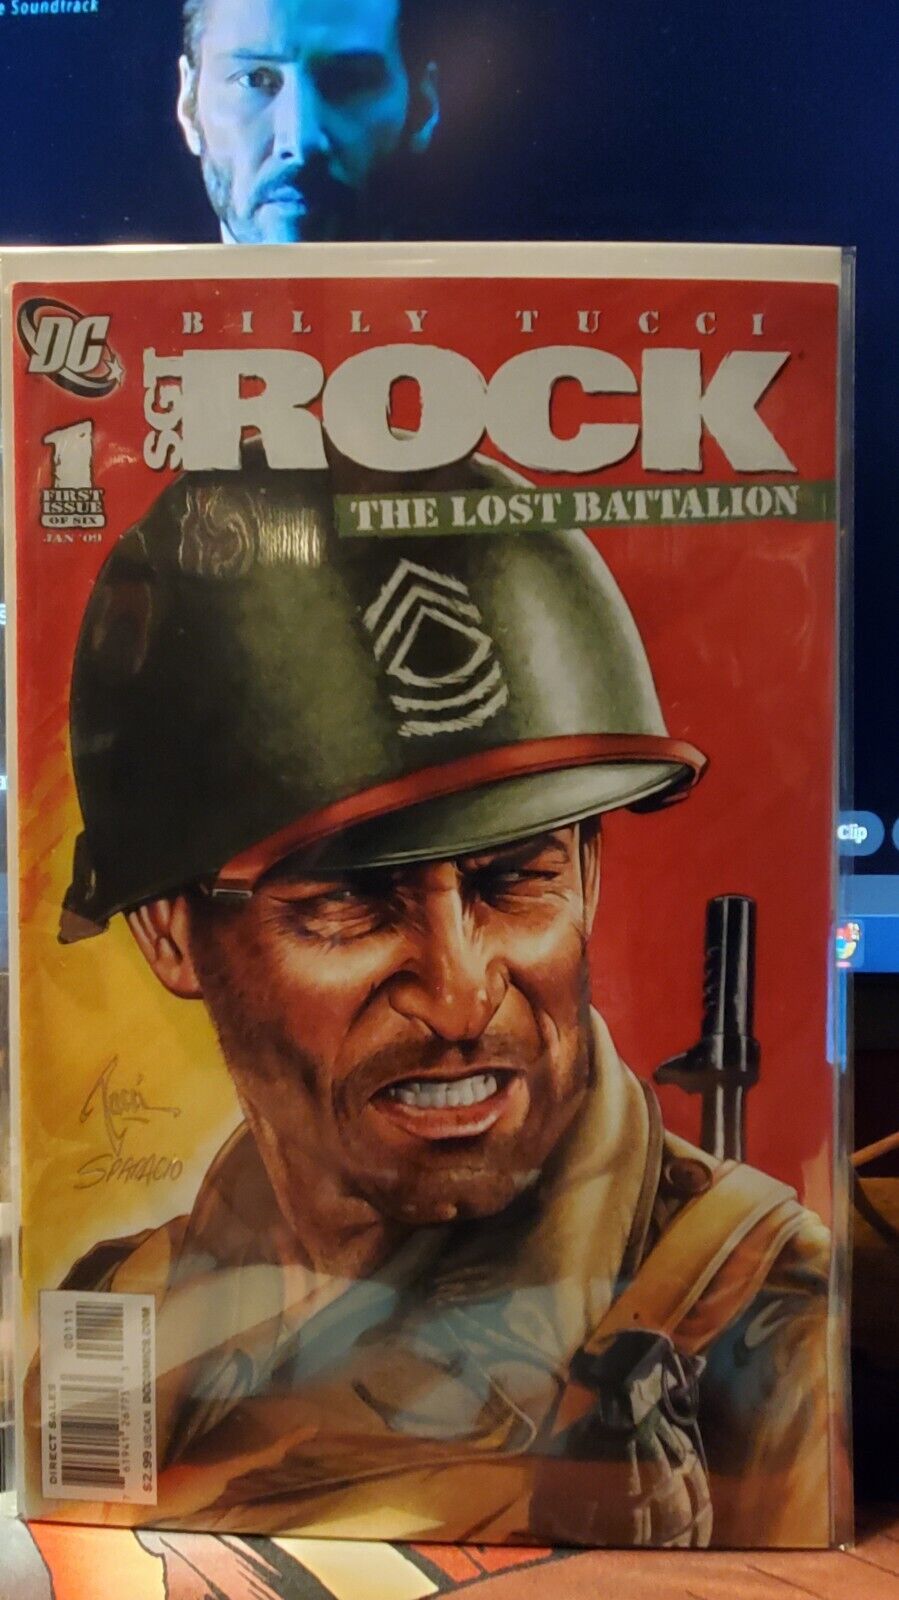 Sgt. Rock: The Lost Battalion Issues #1-5 Missing #6, But Issue 379 With Lot